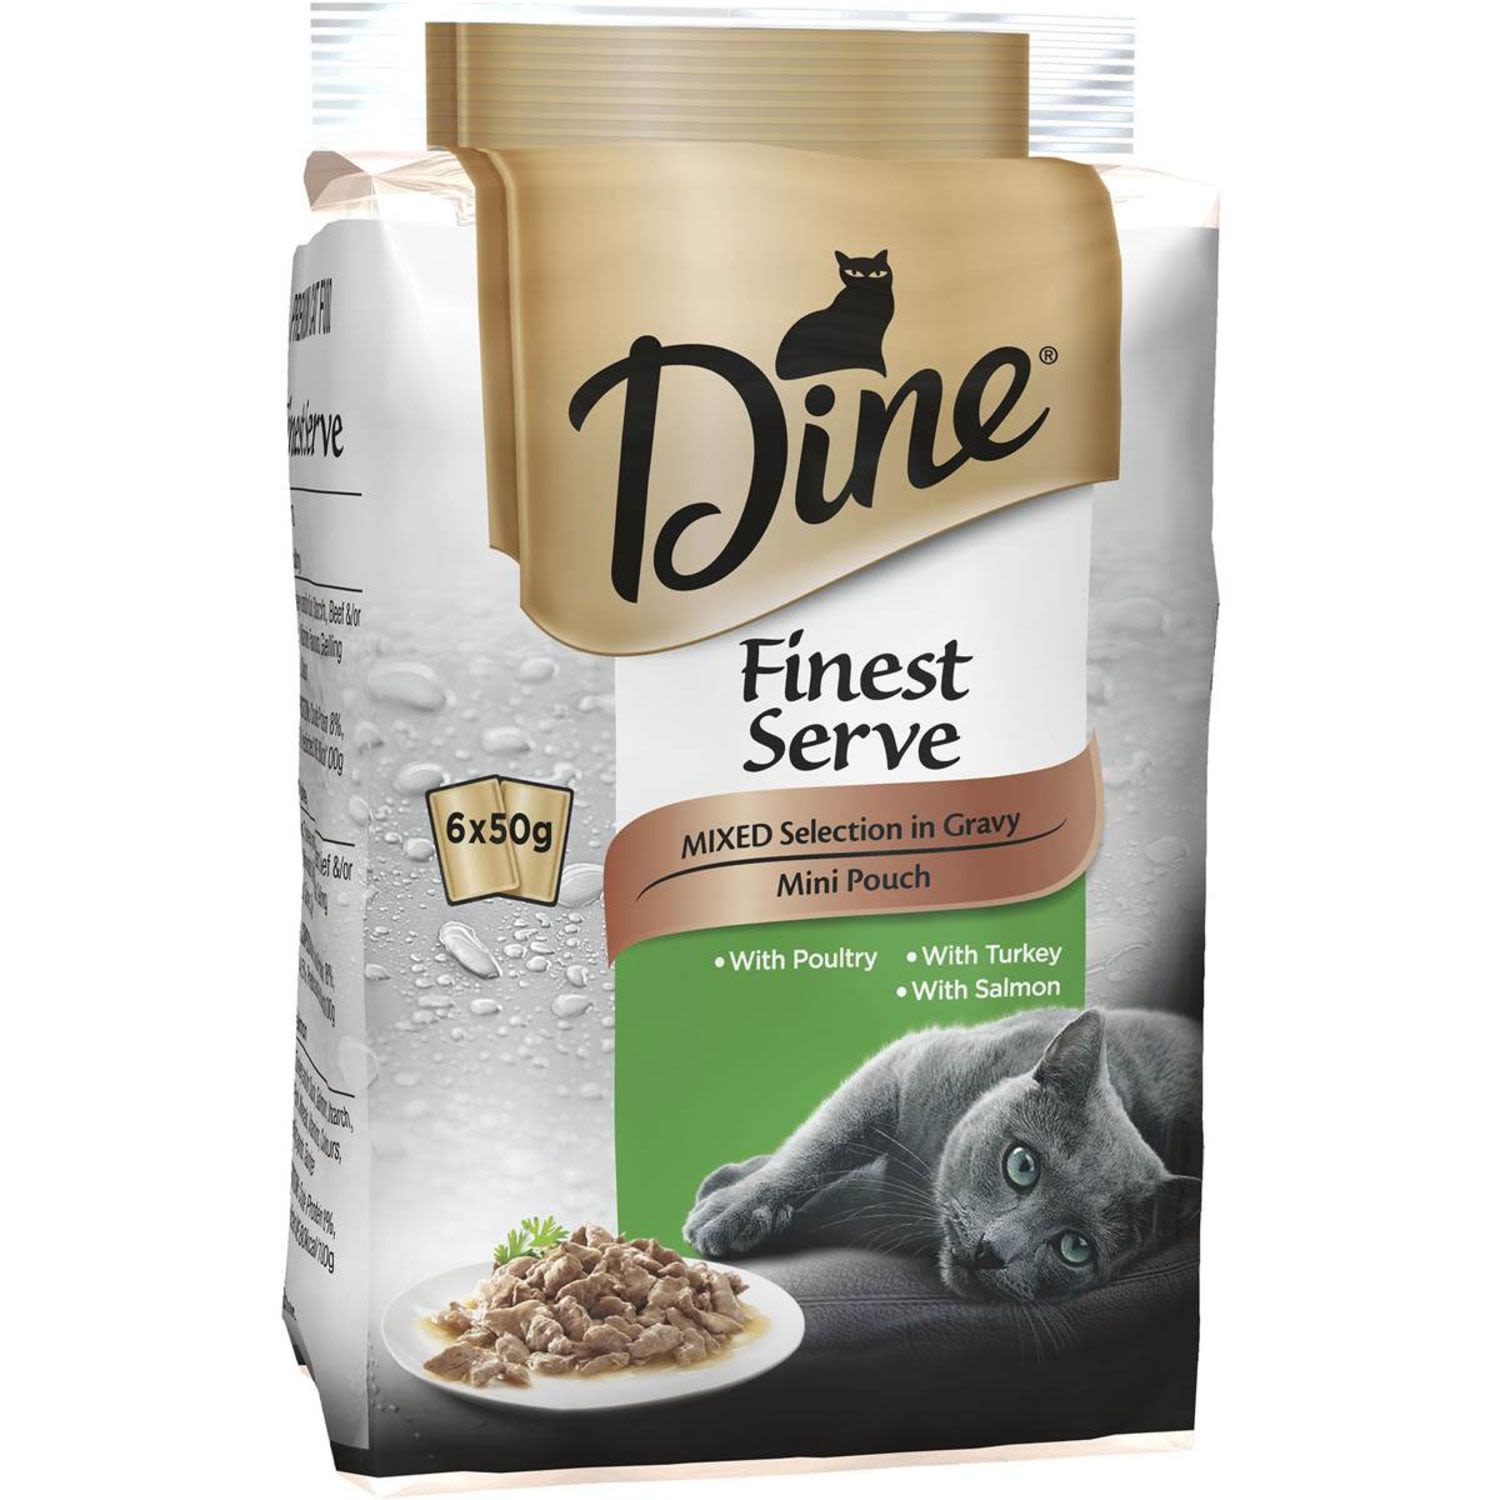 Dine Finest Serve Mixed Selection In Gravy Mini Pouch, 6 Each